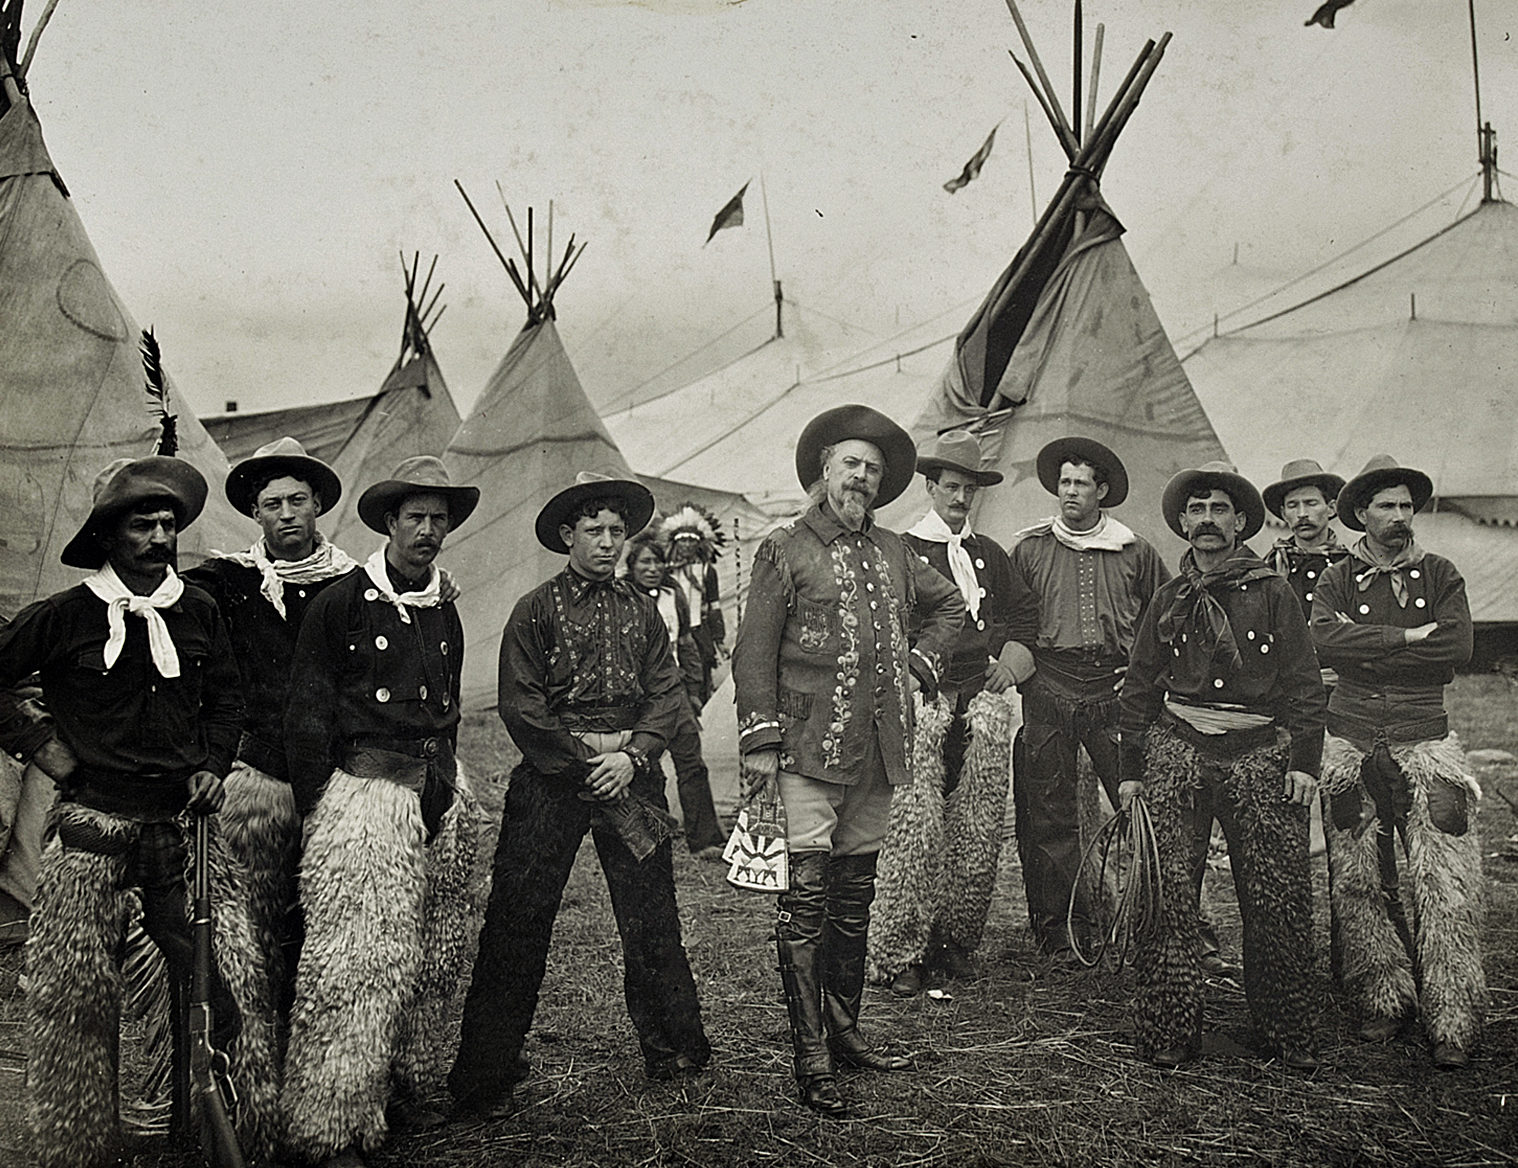 Buffalo Bill and his crew in Dundee in 1904.